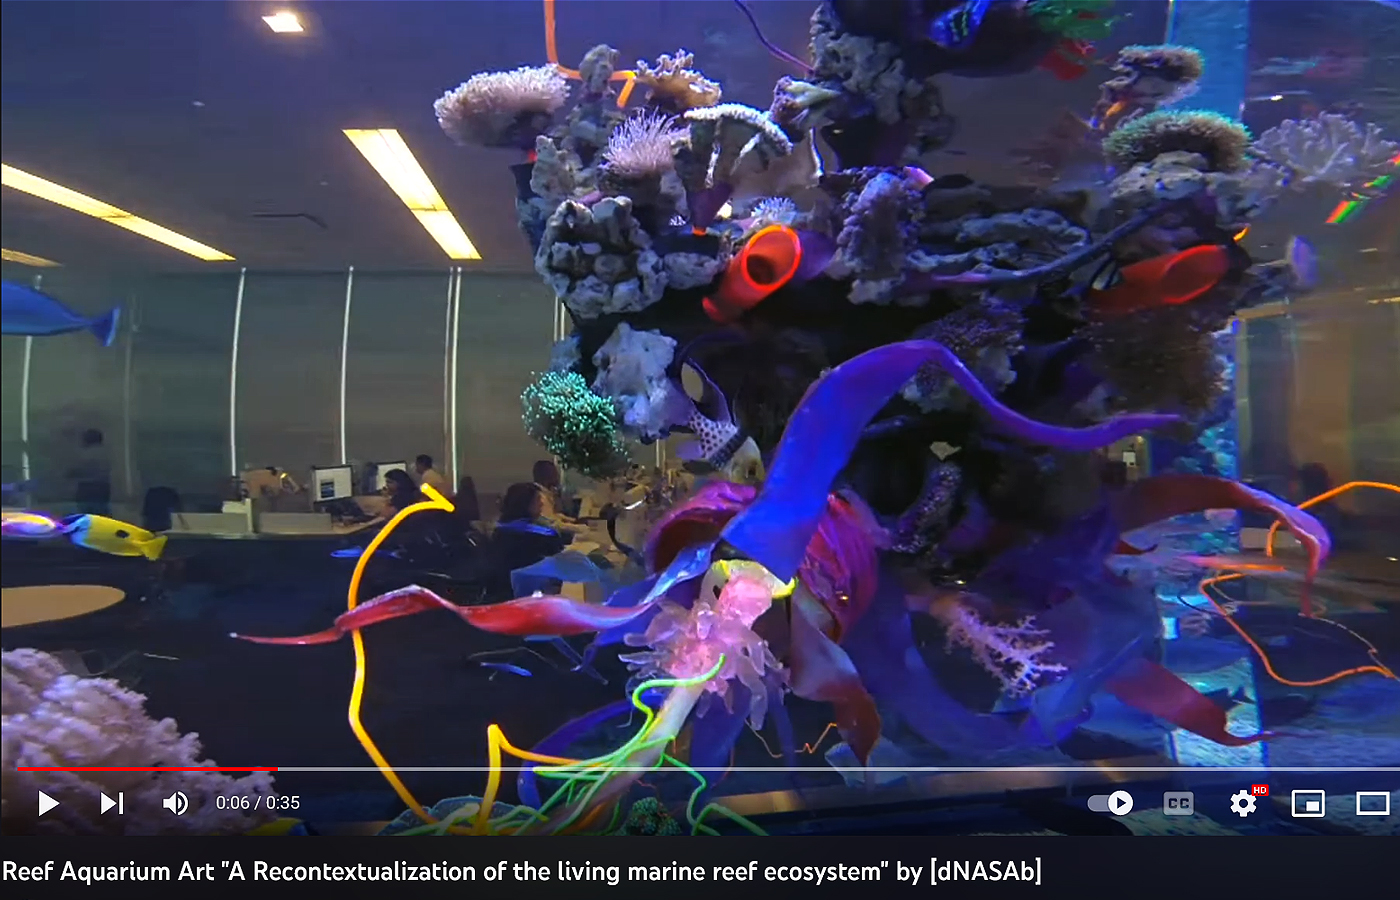 Reef Aquarium Art_ A Recontextualization of the living marine reef ecosystem" by [dNASAb]